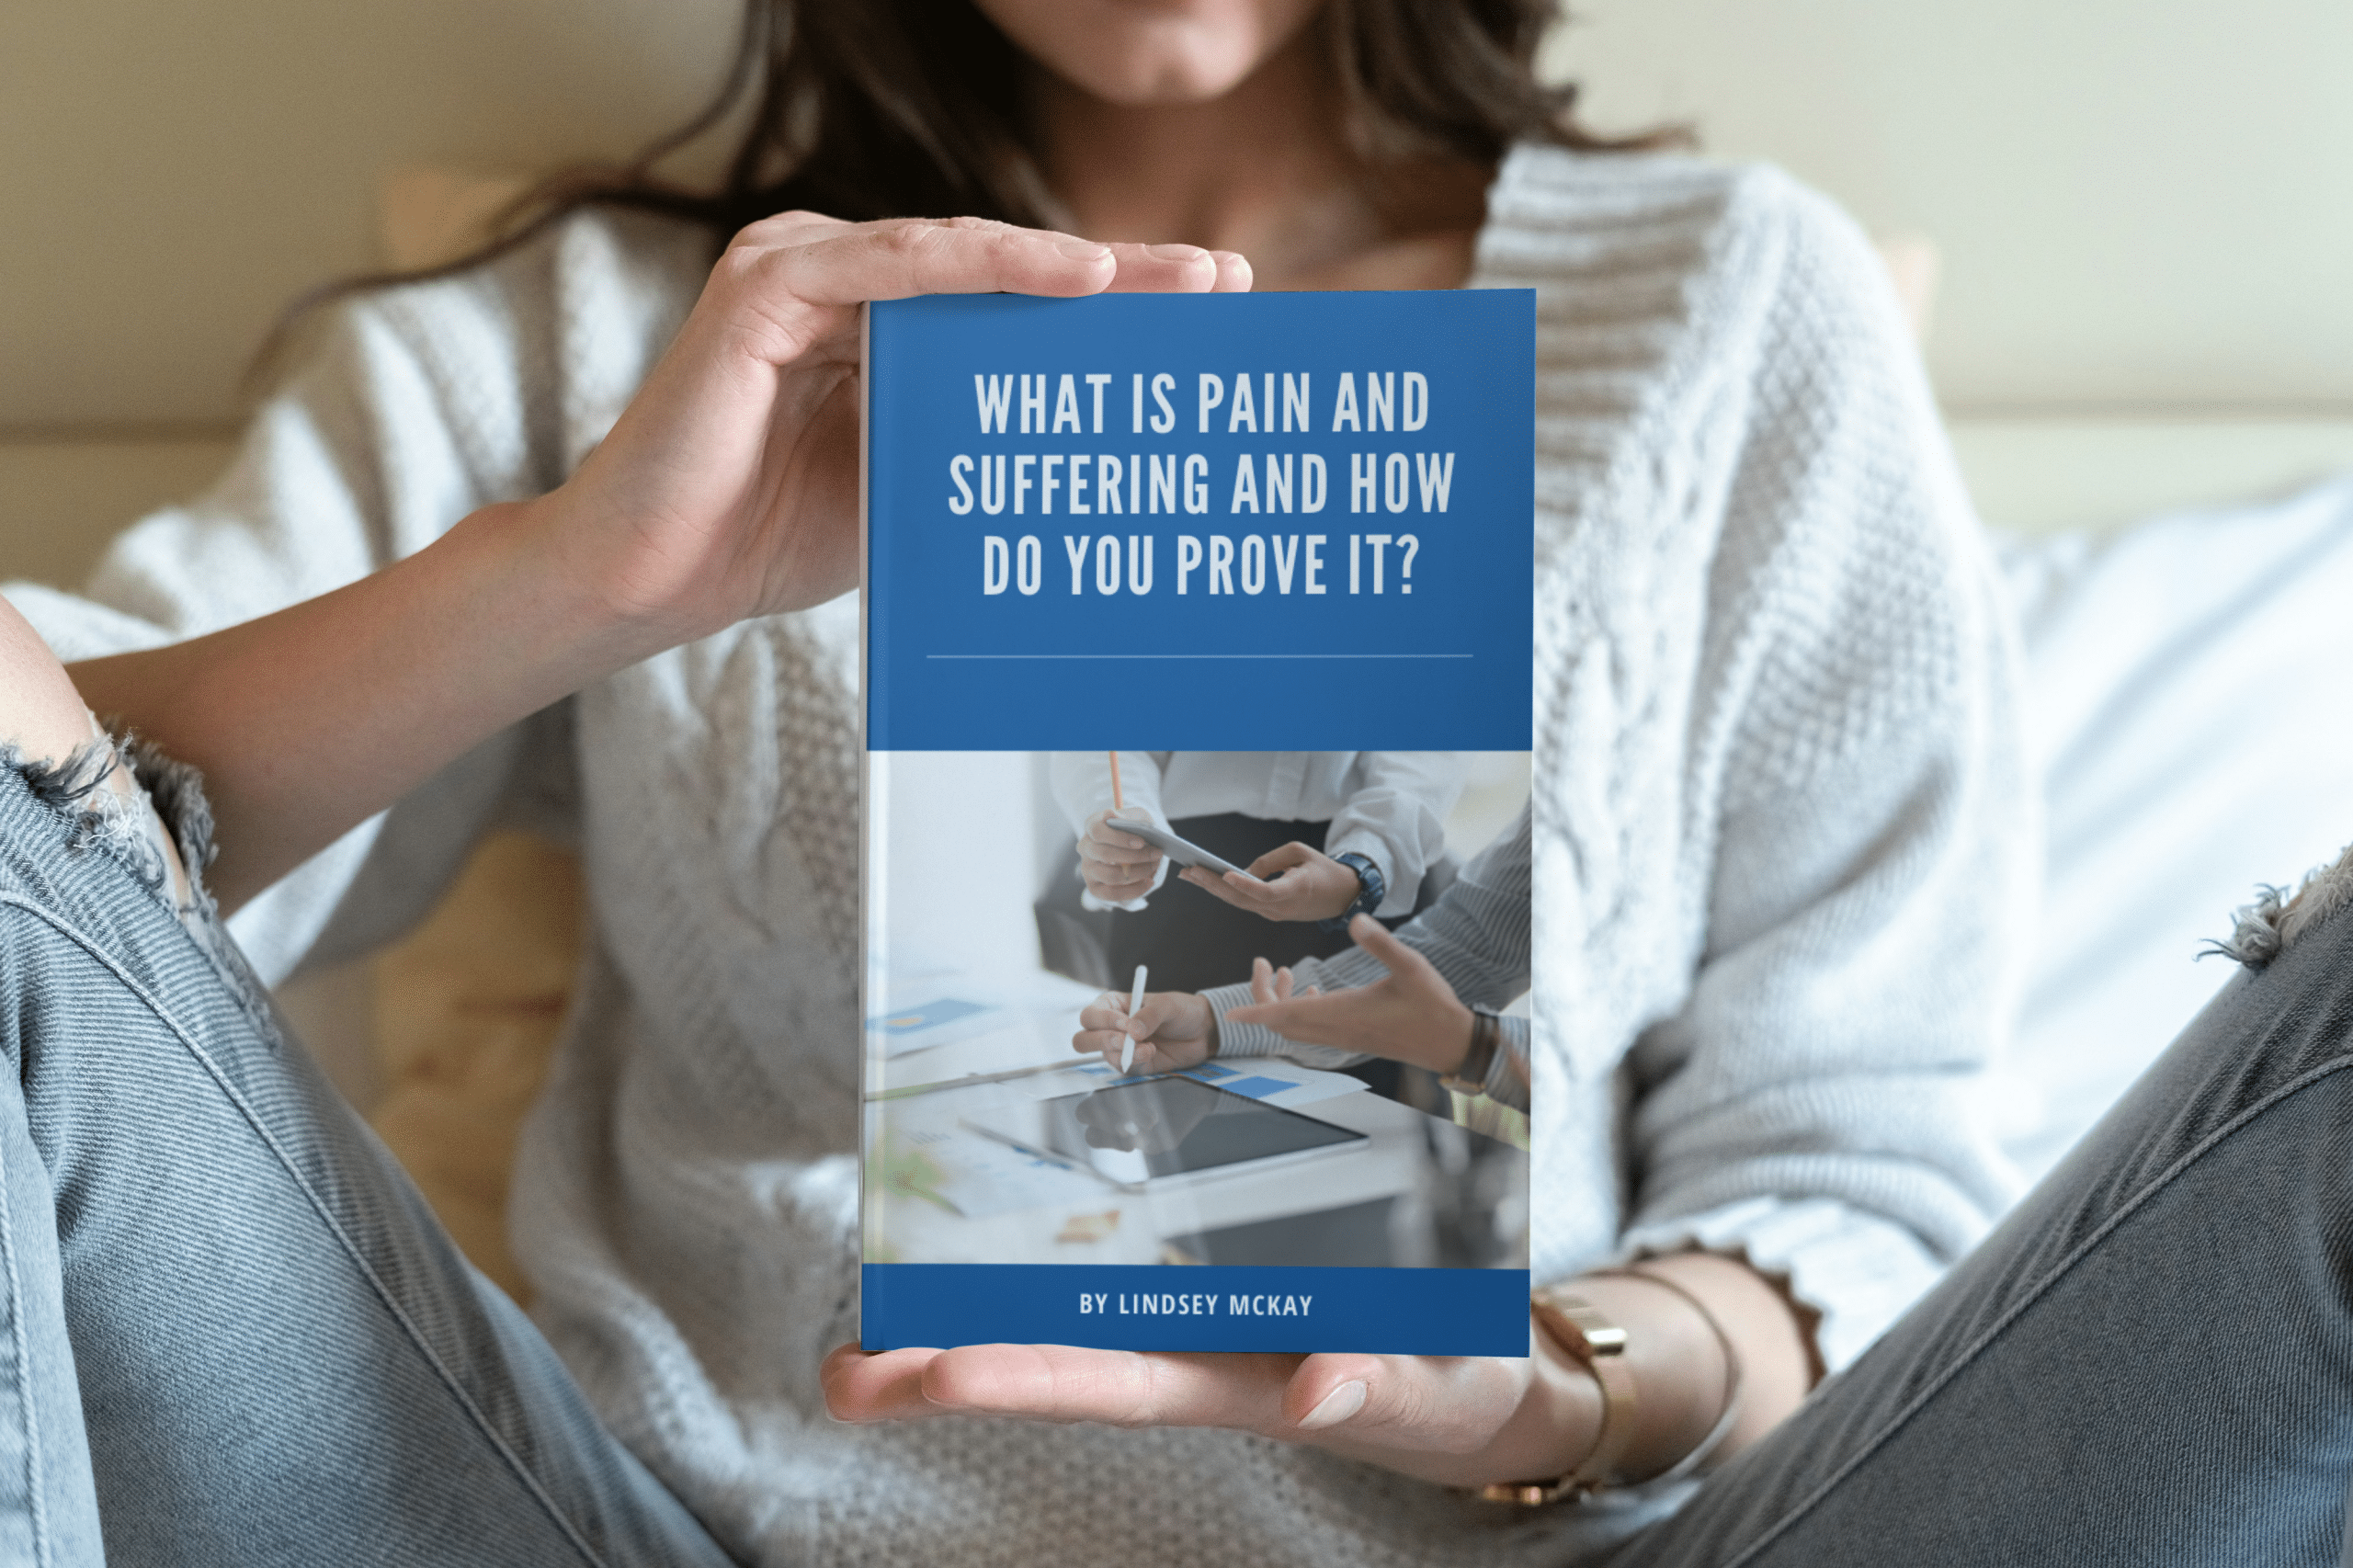 What Are Pain and Suffering and How Do You Prove It?